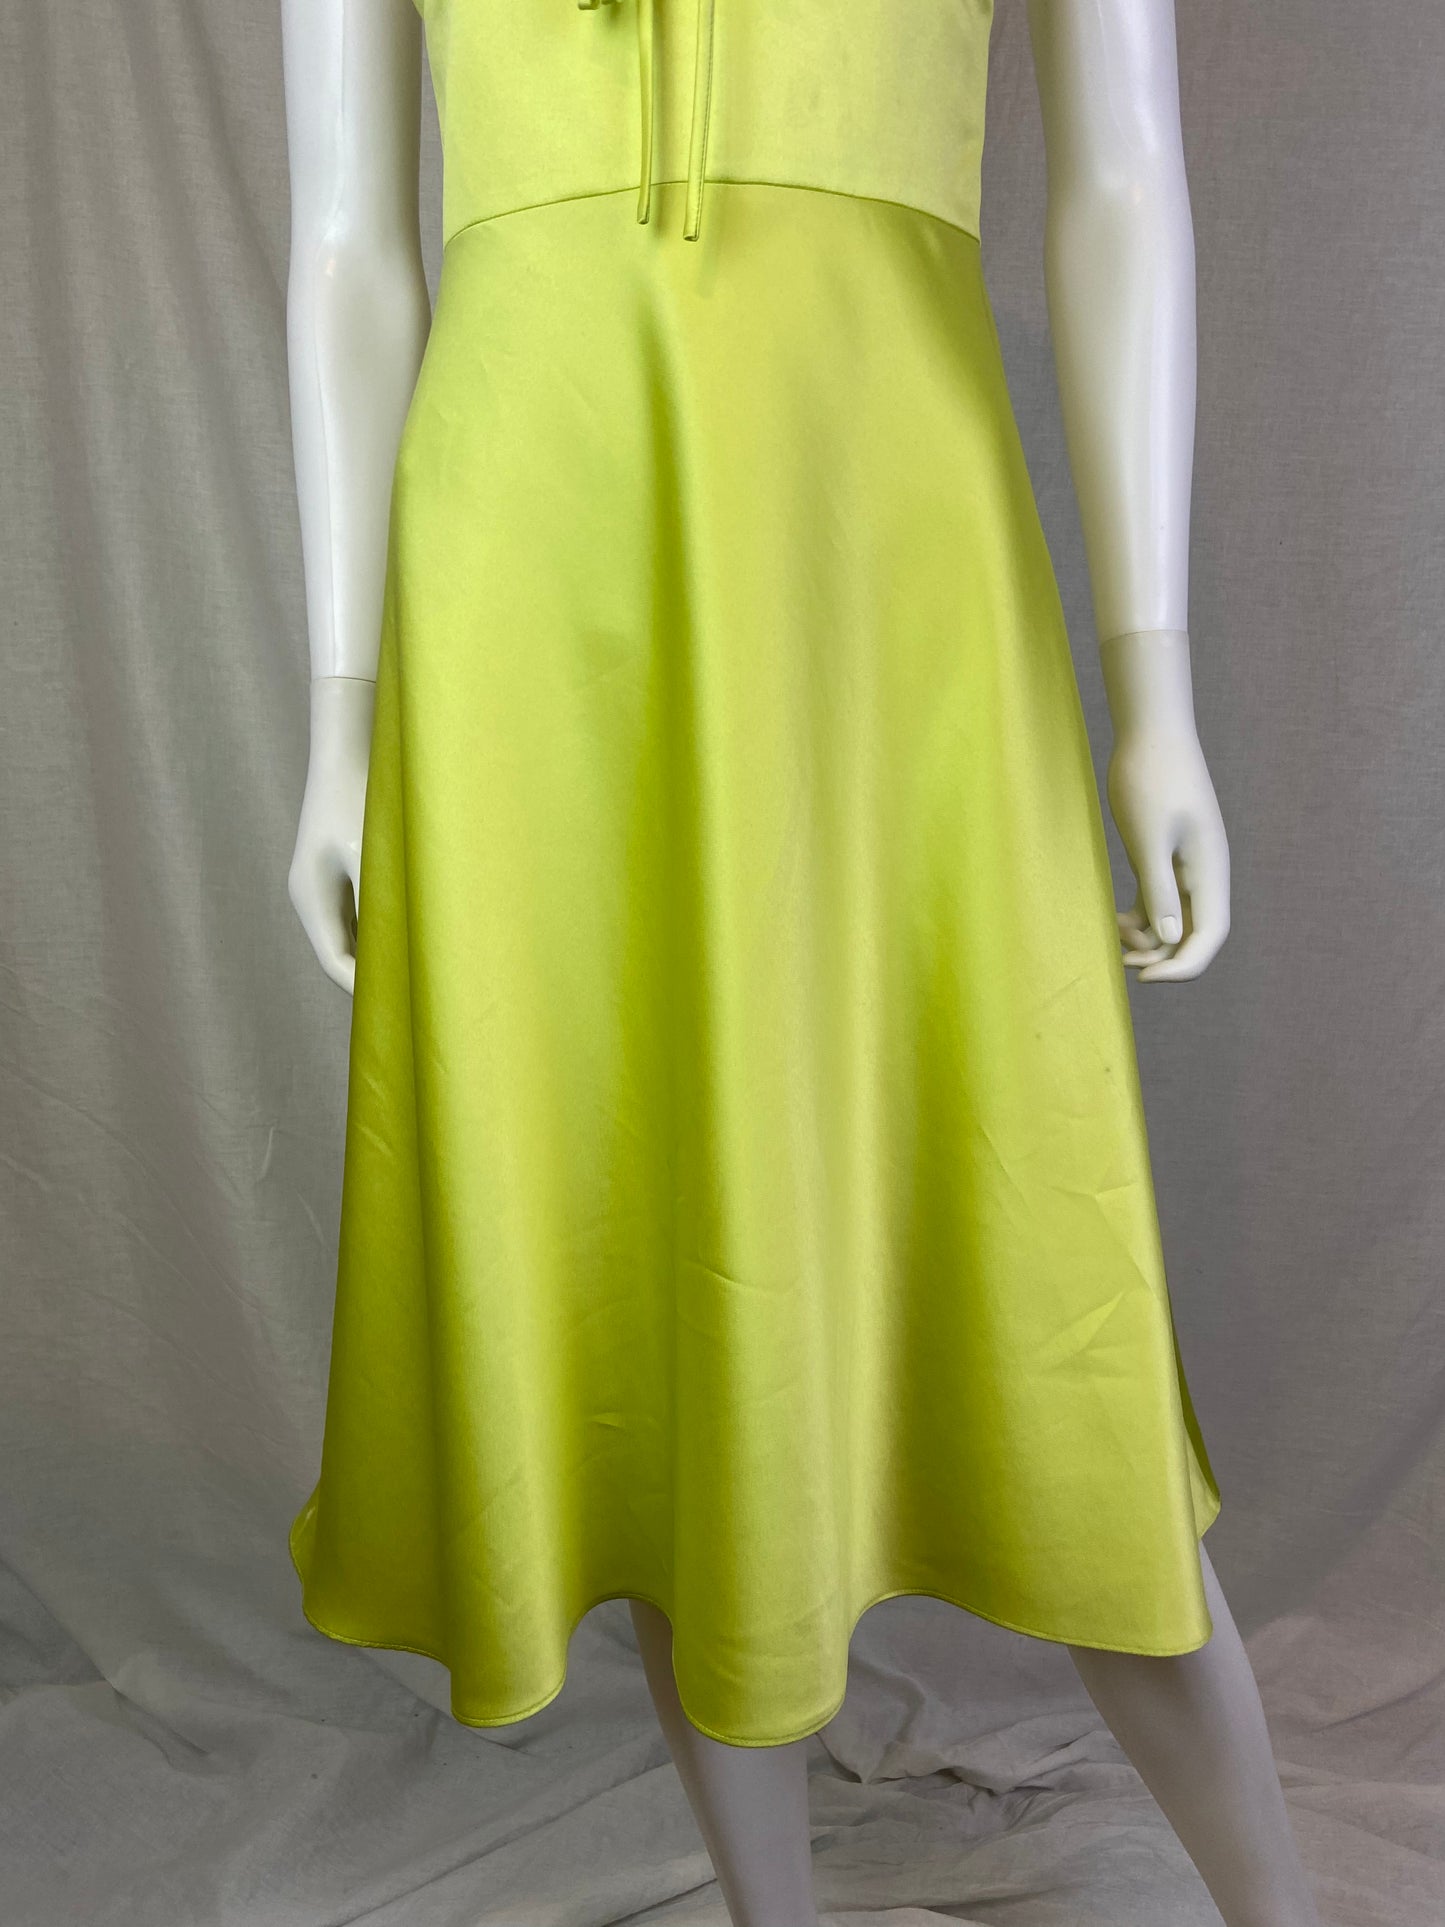 David Meister Lime Green Chartreuse Satin Plunge Dress ABBY ESSIE STUDIOS